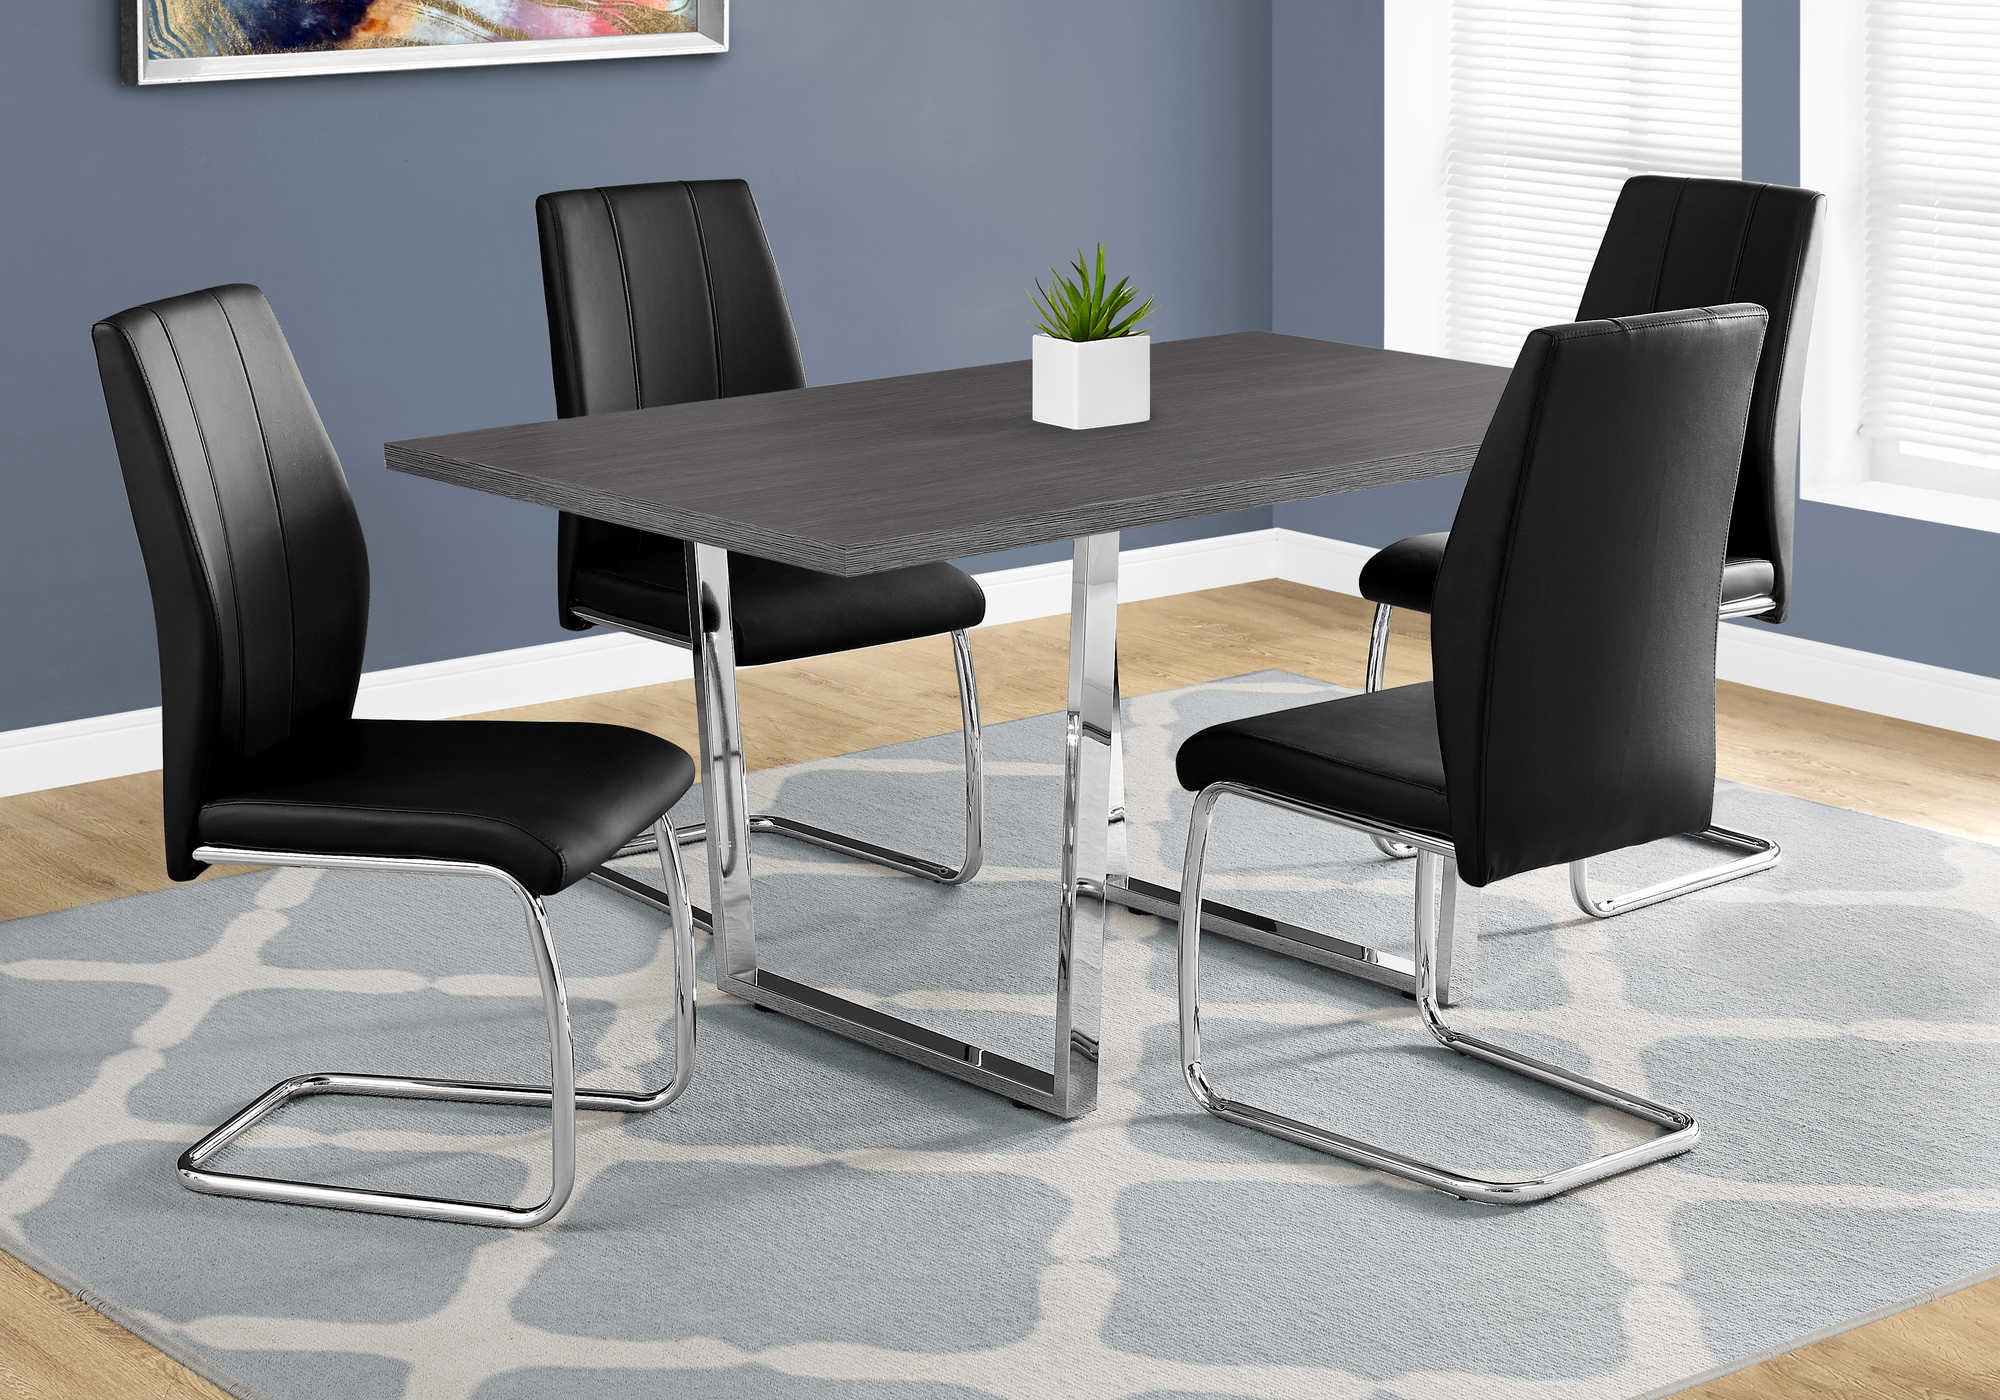 DINING CHAIR - 2PCS / 39"H / BLACK LEATHER-LOOK / CHROME